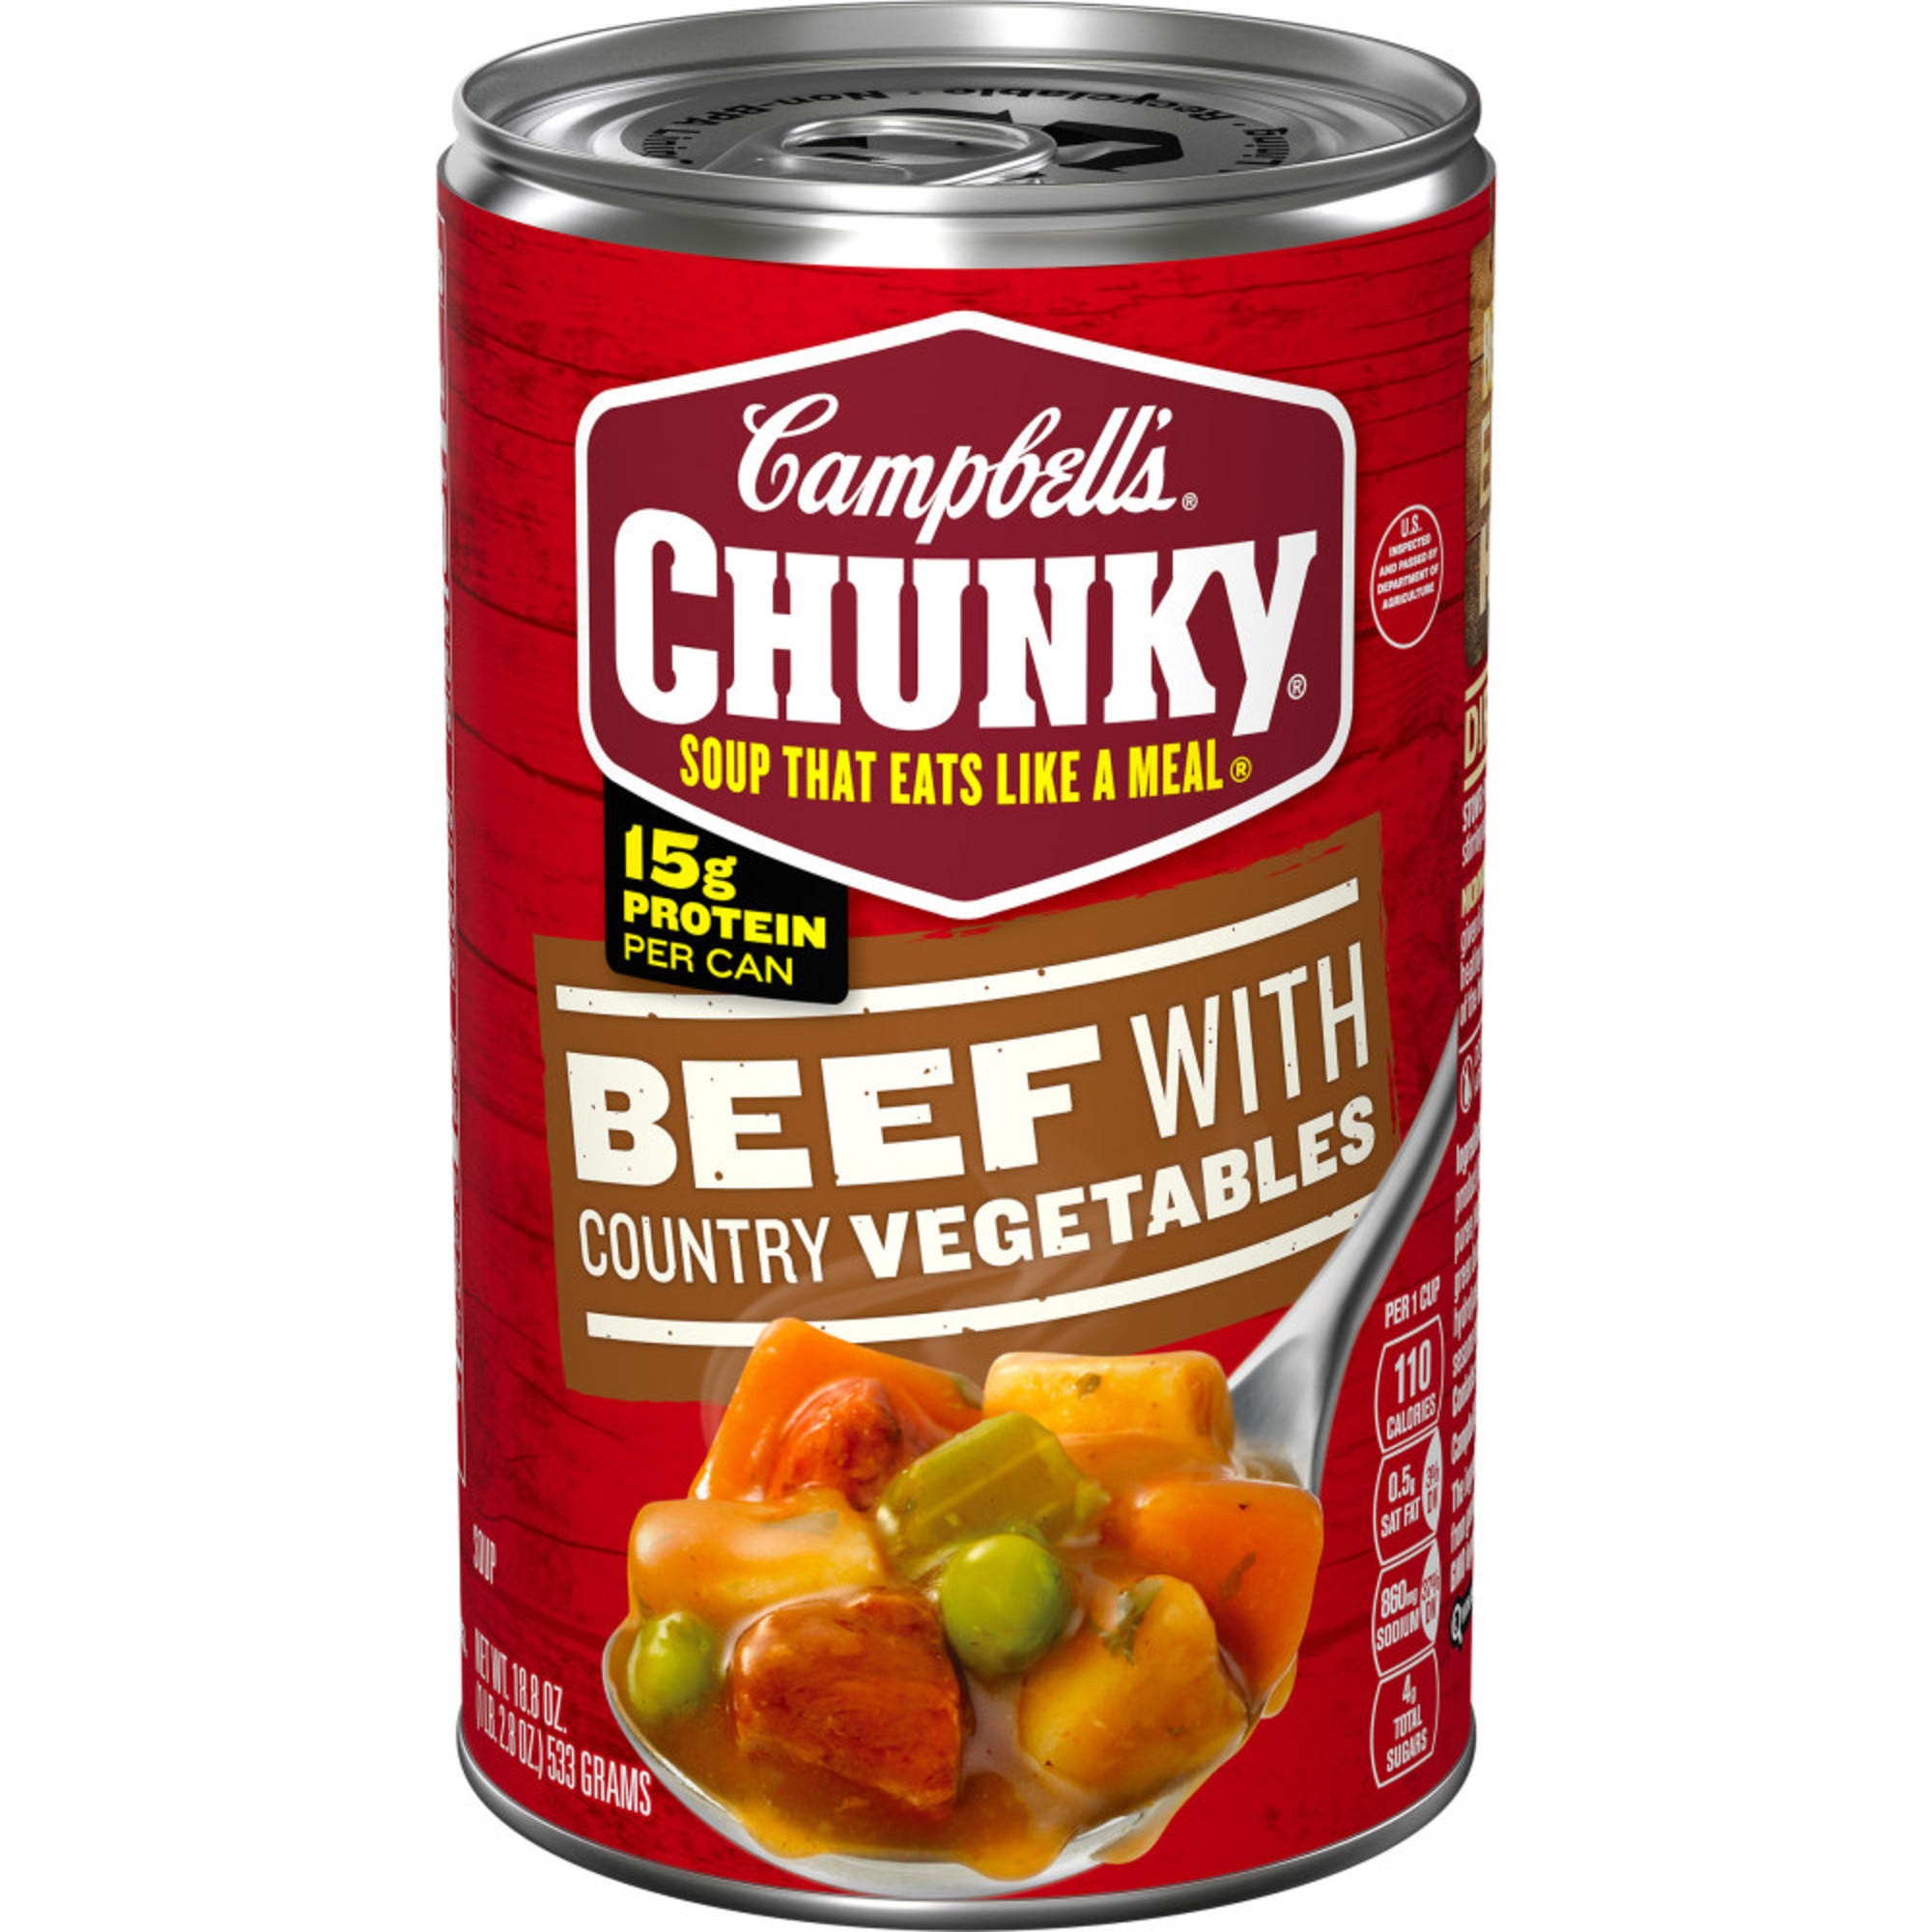 Campbells Chunky Soup Can, Beef with Country Vegetables - 18.8 oz